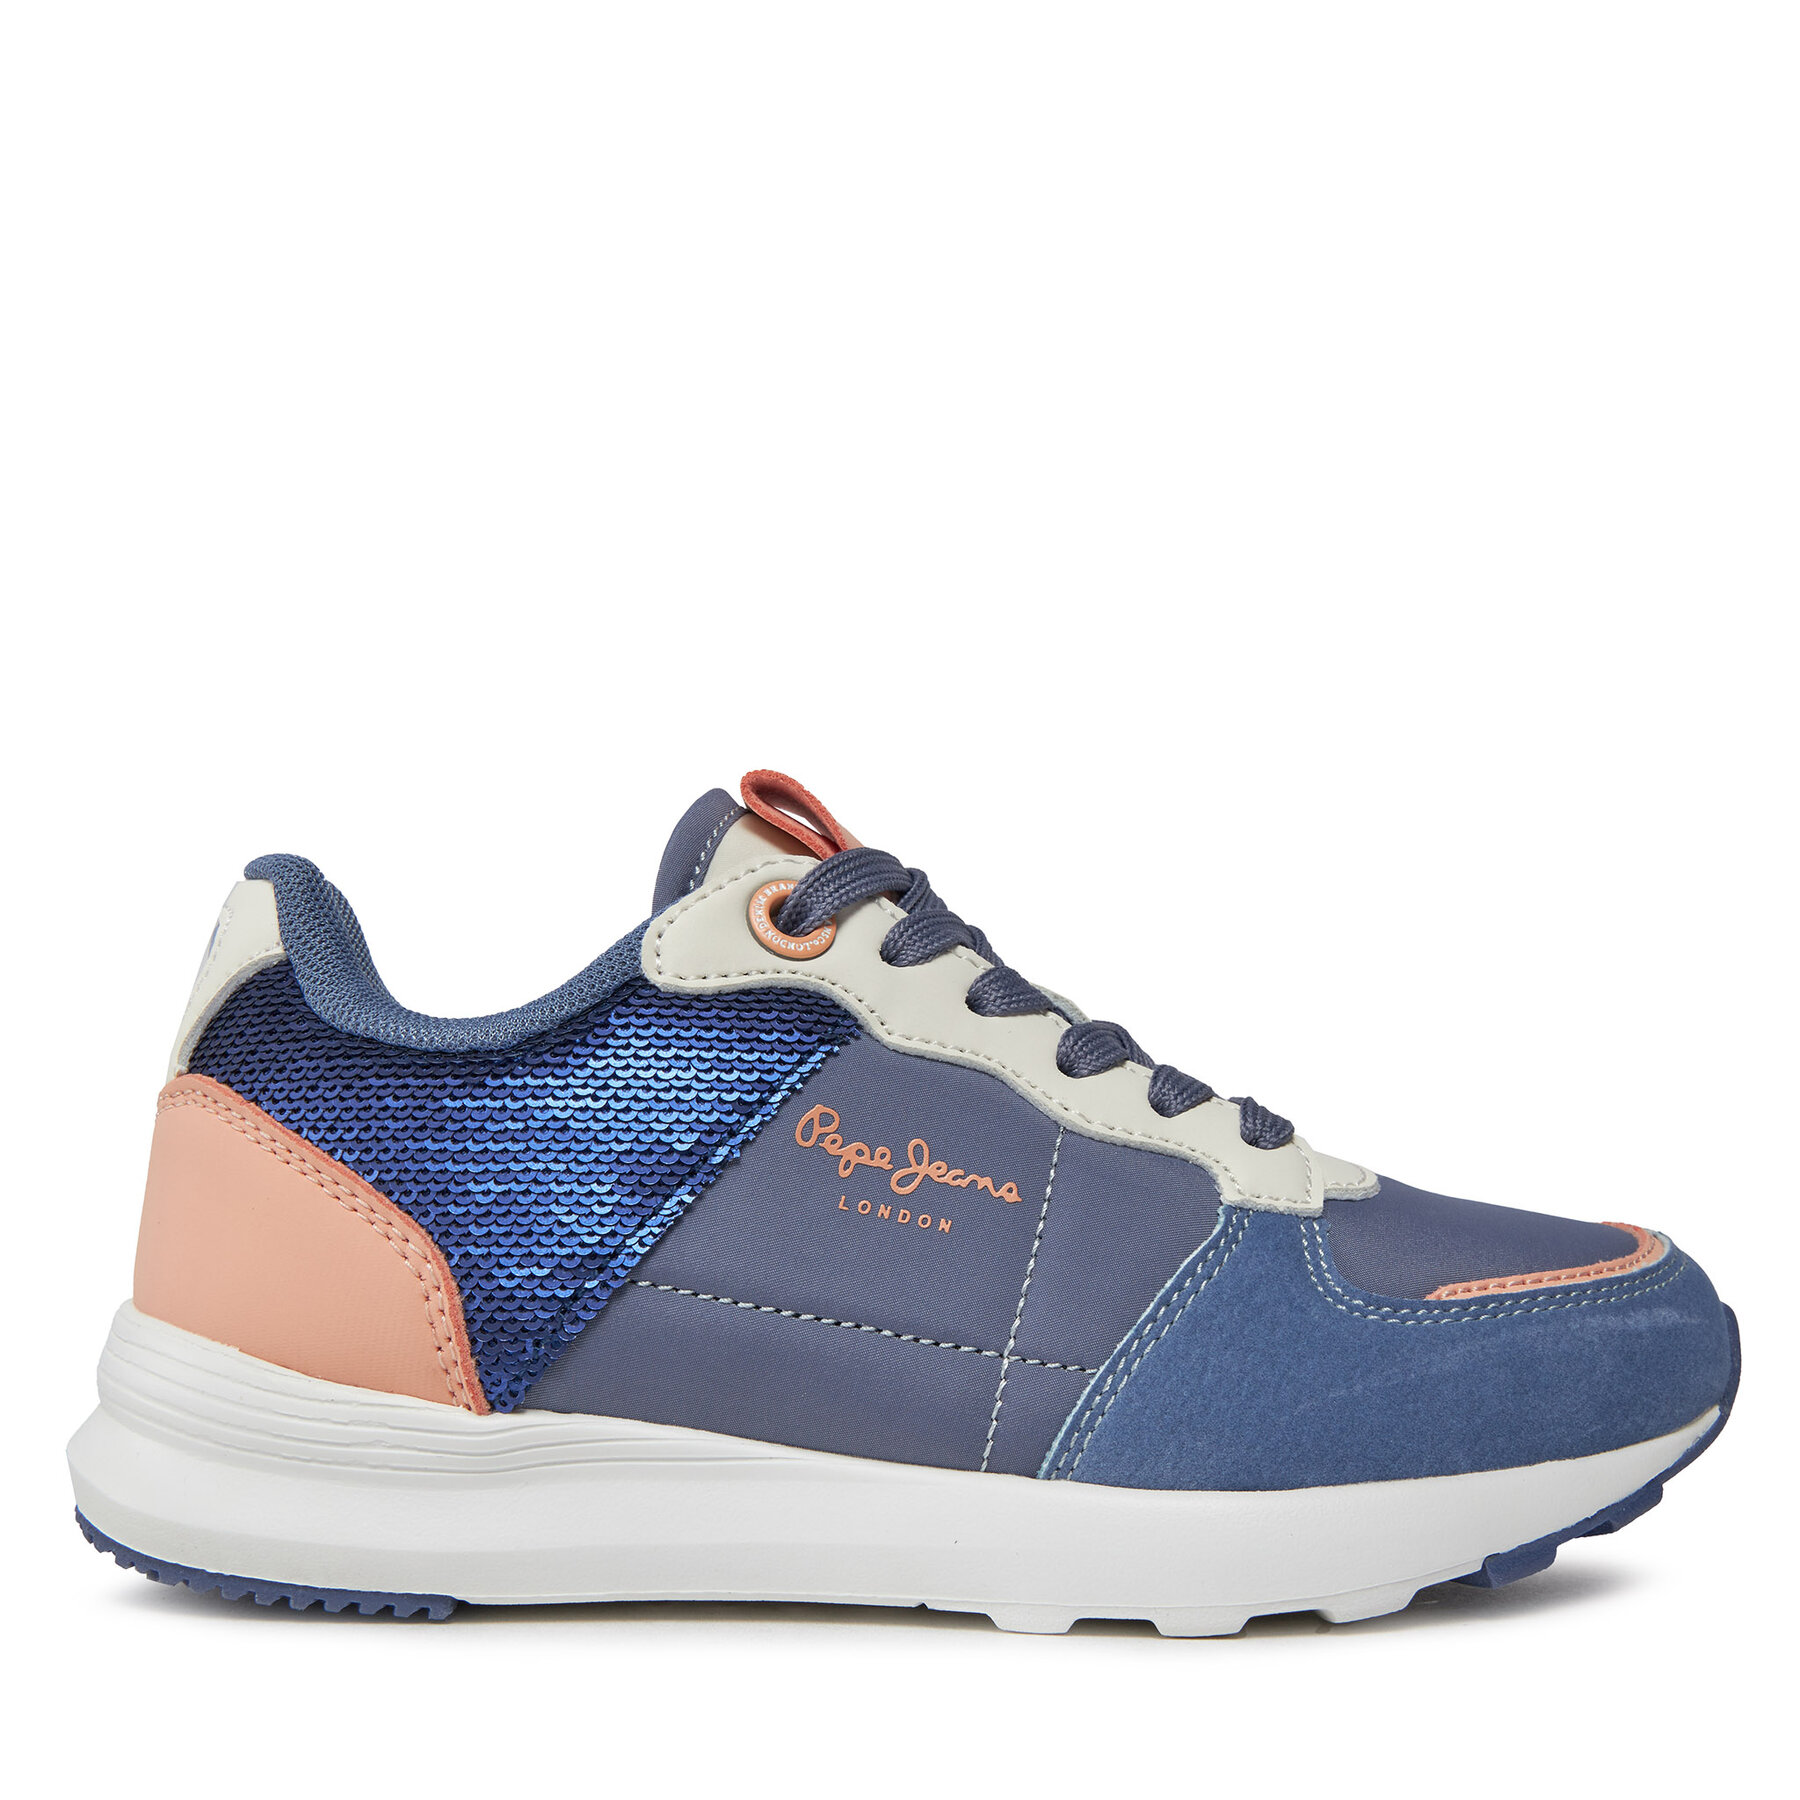 Sneakers Pepe Jeans PGS30591 Chambray 564 von Pepe Jeans